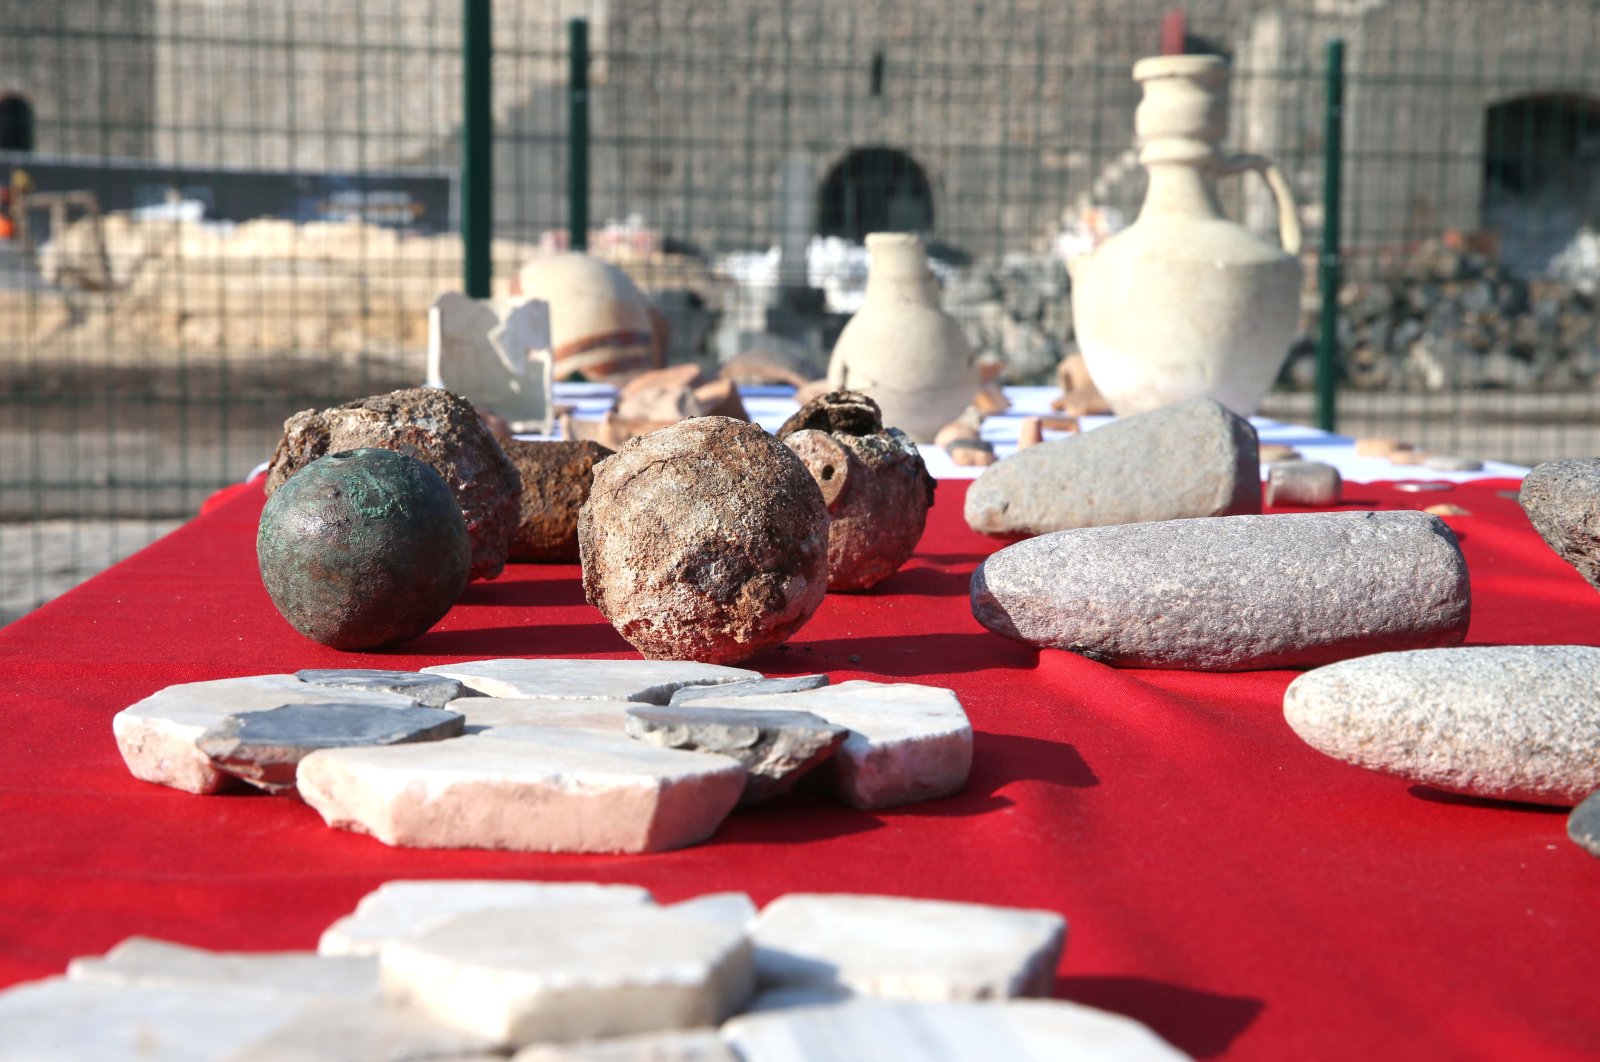 Newly found artifacts are displayed on a table on site at the historic 9,000-year-old Amida Mound, Dec. 31, 2021. (AA Photo)